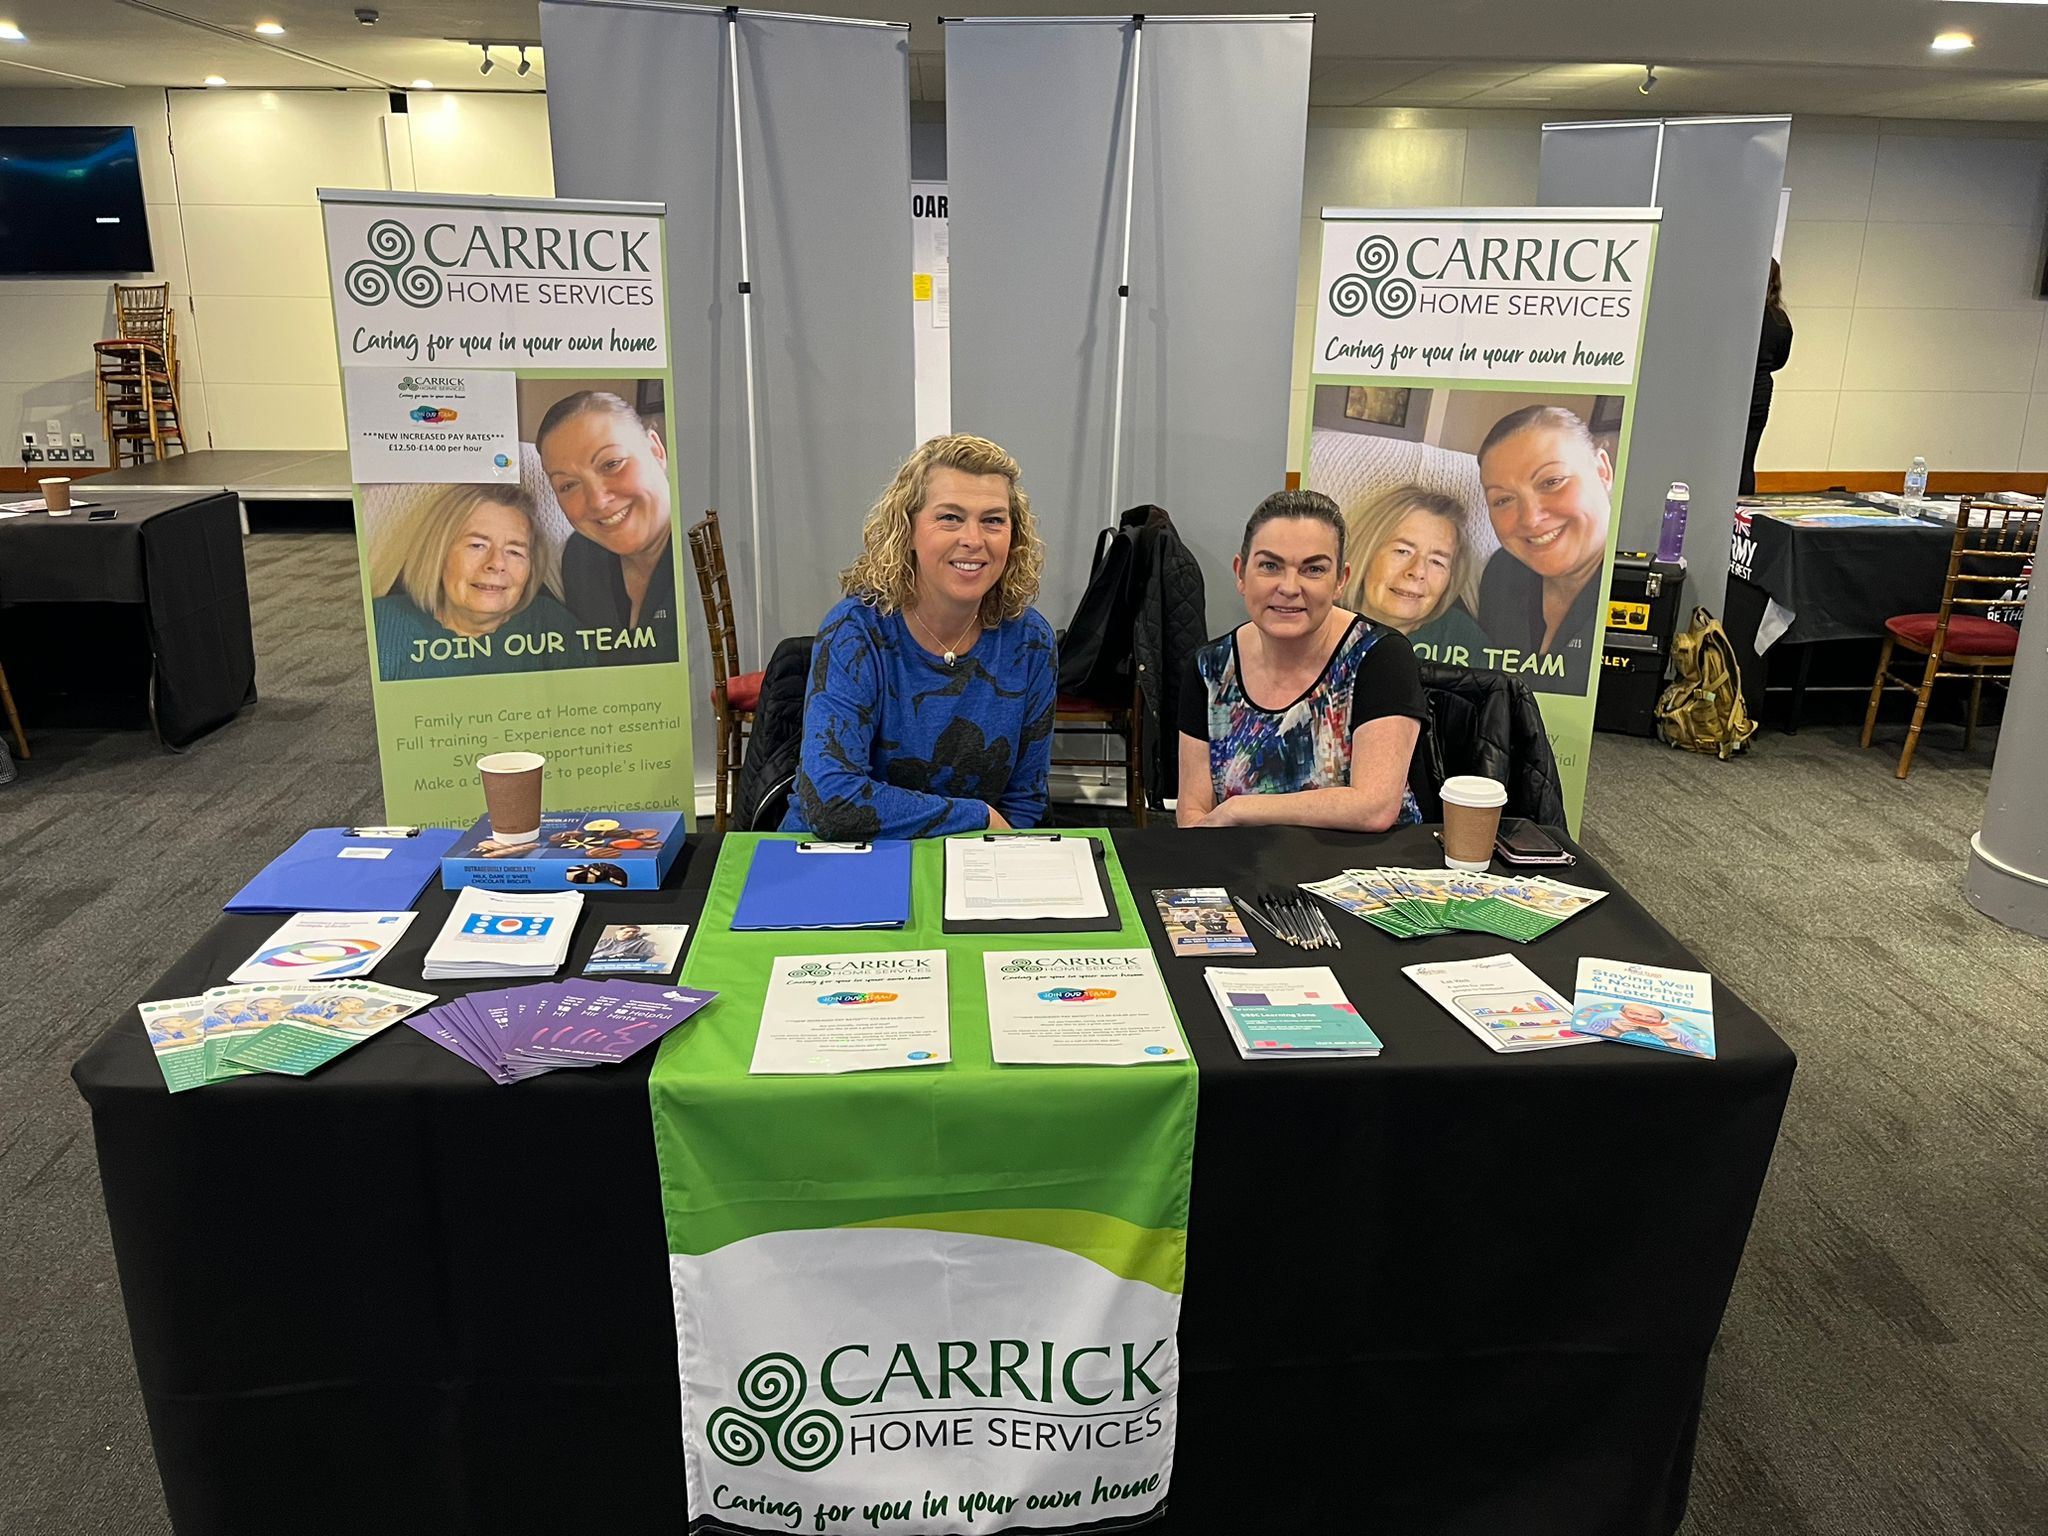 Carrick Home Services at our event in Edinburgh